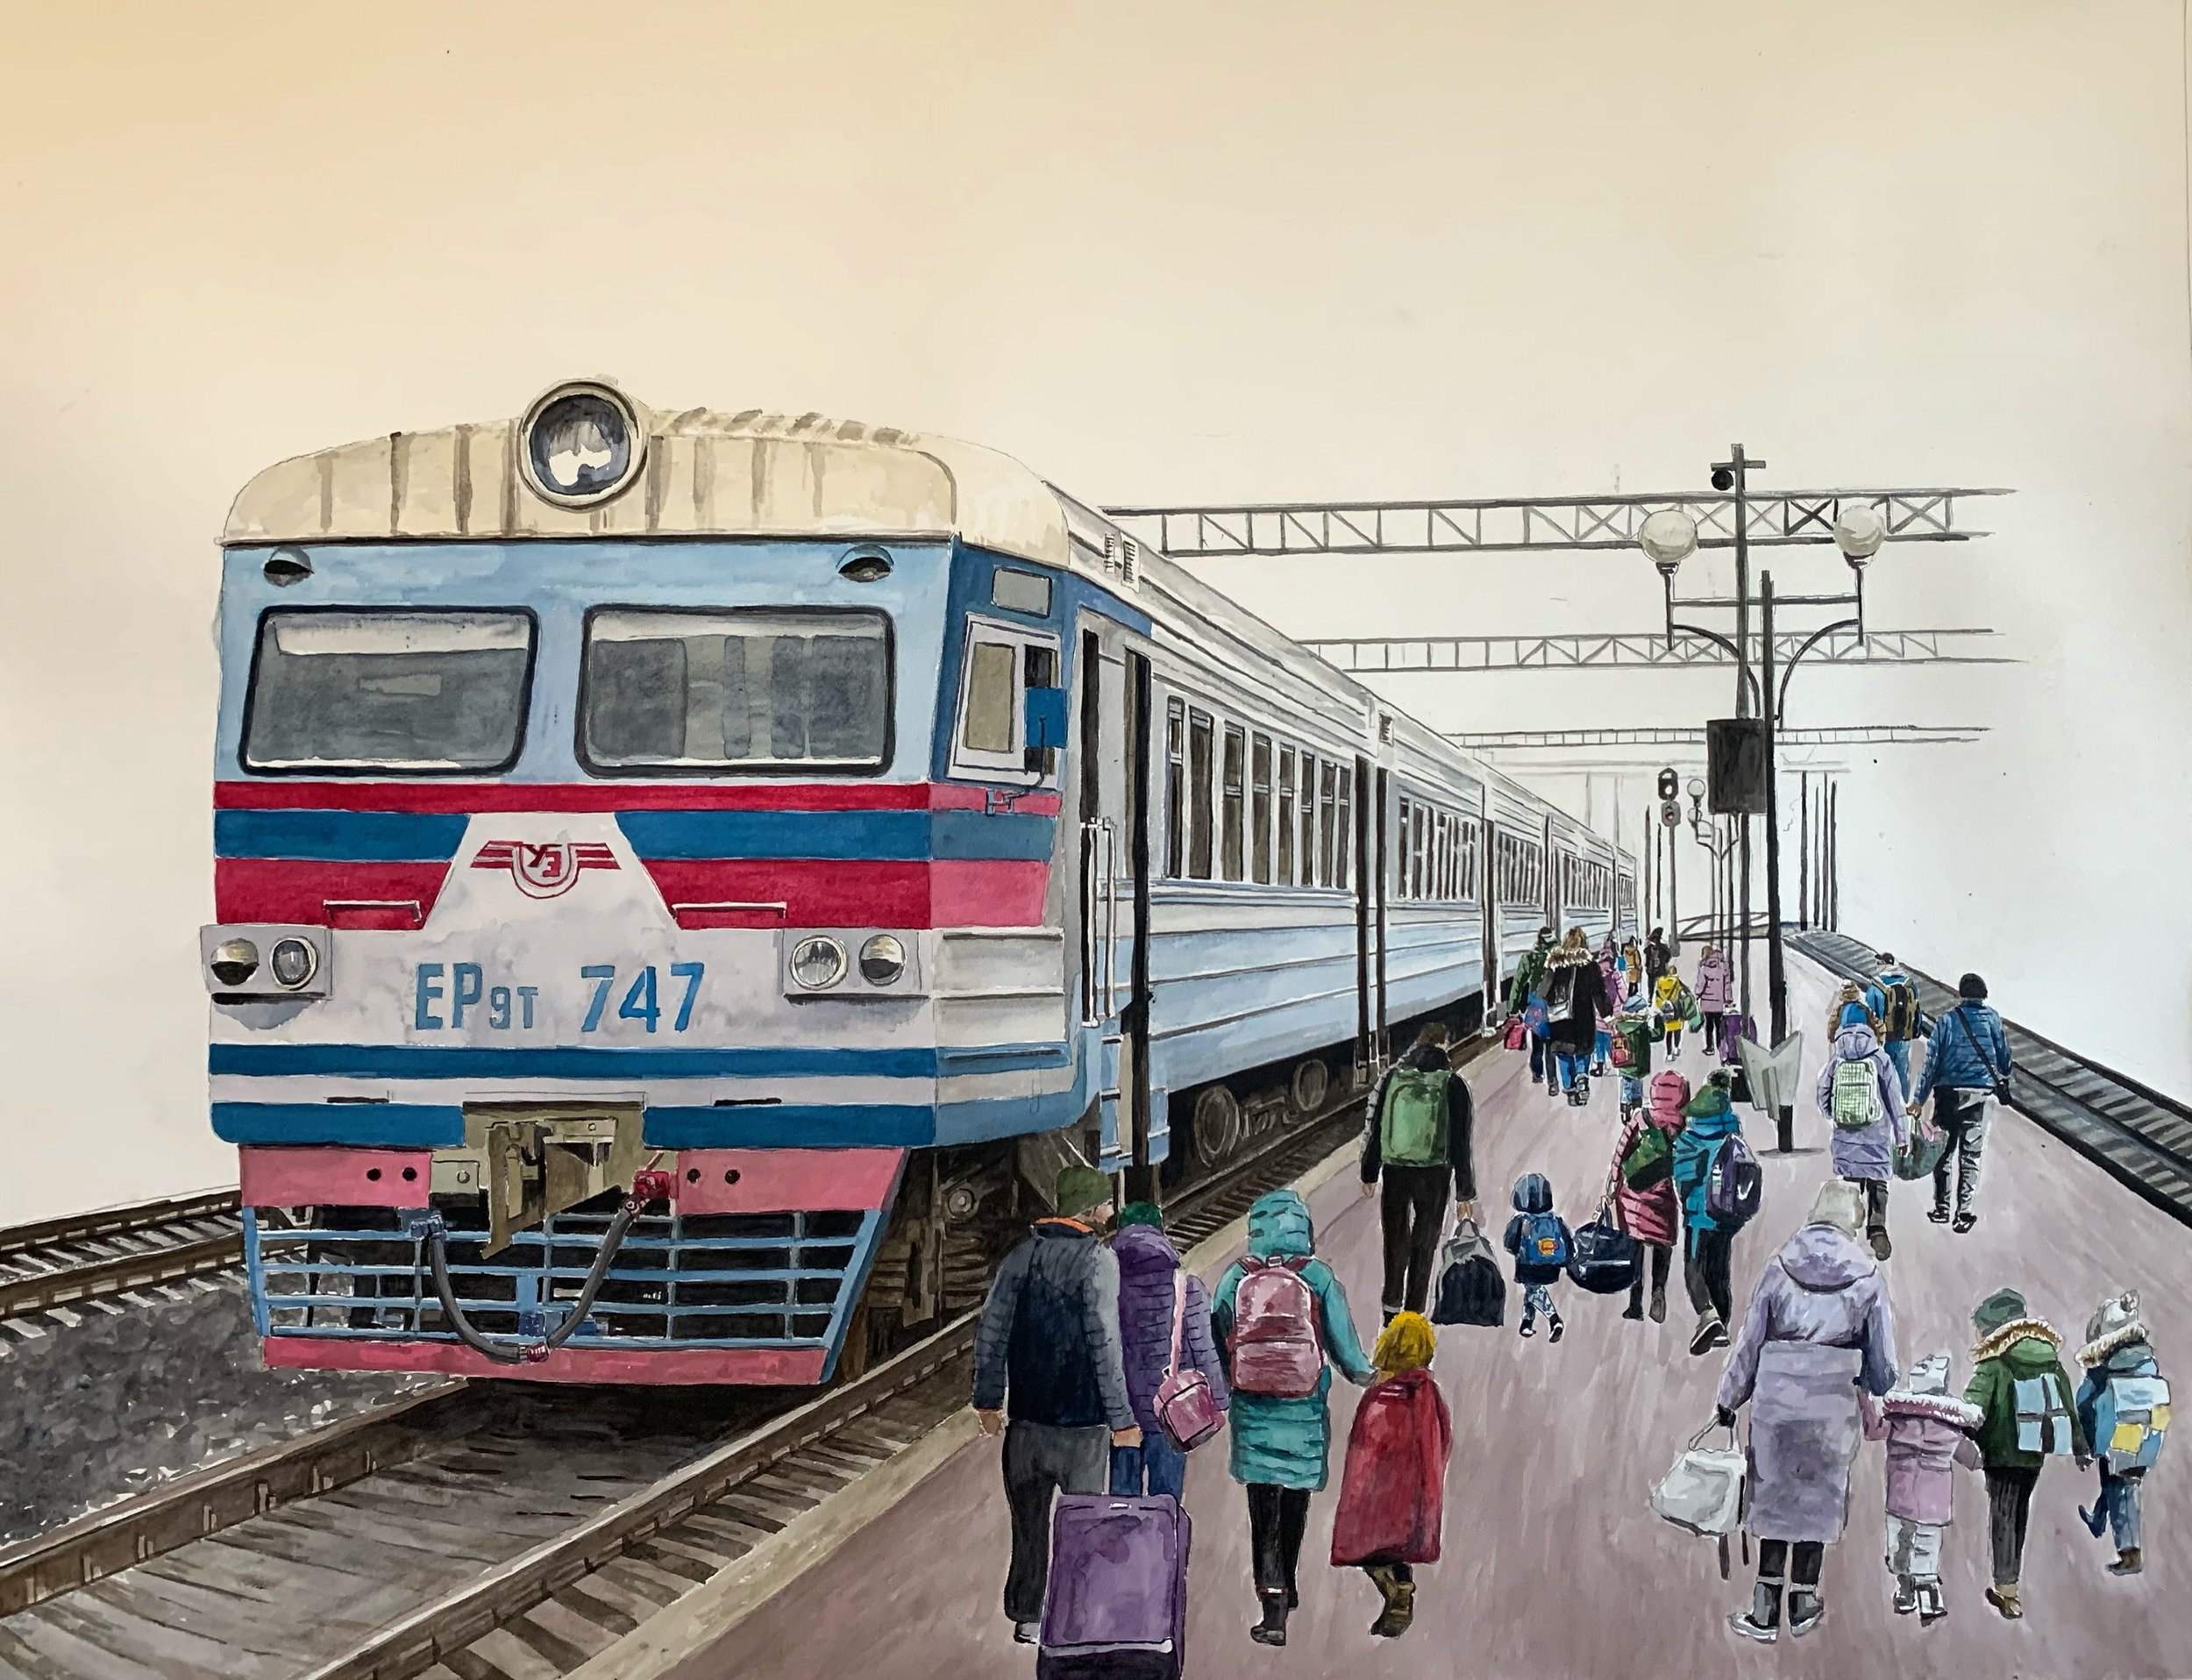 Train, People on Platform, 2022, 30 x 41 inches, acrylic on paper